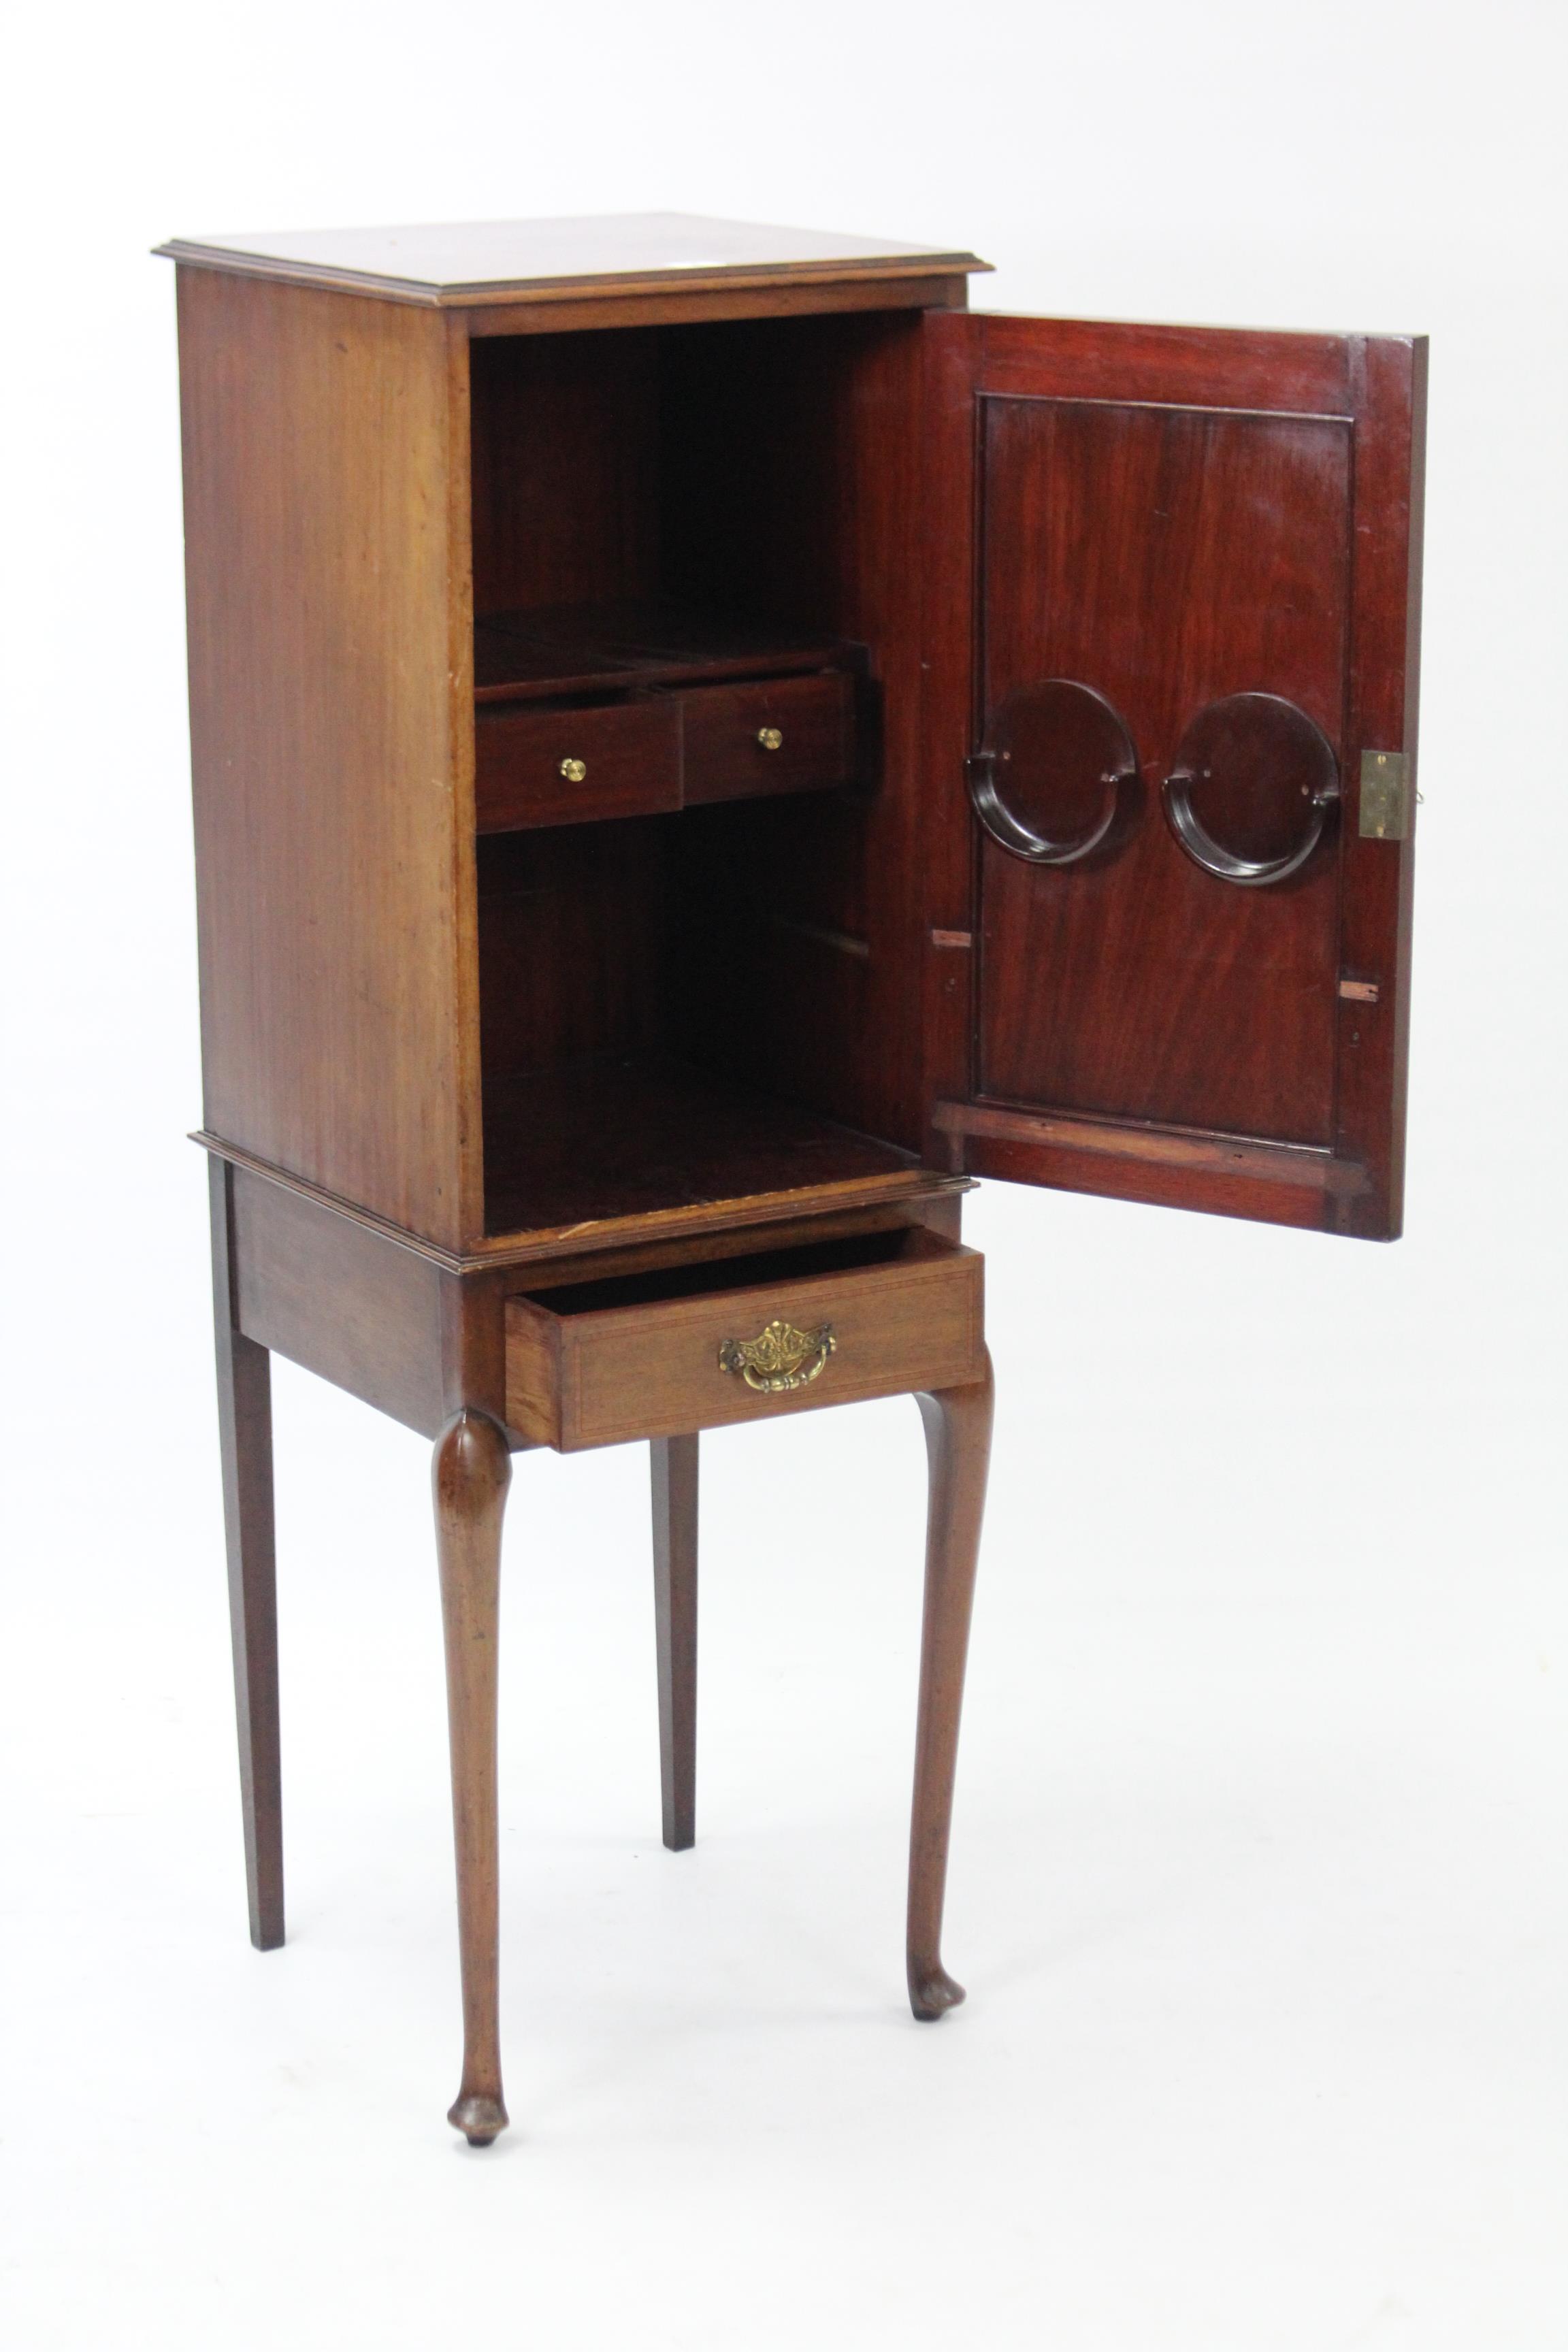 An Edwardian inlaid-mahogany small upright cabinet with fitted interior enclosed by panel door above - Image 2 of 2